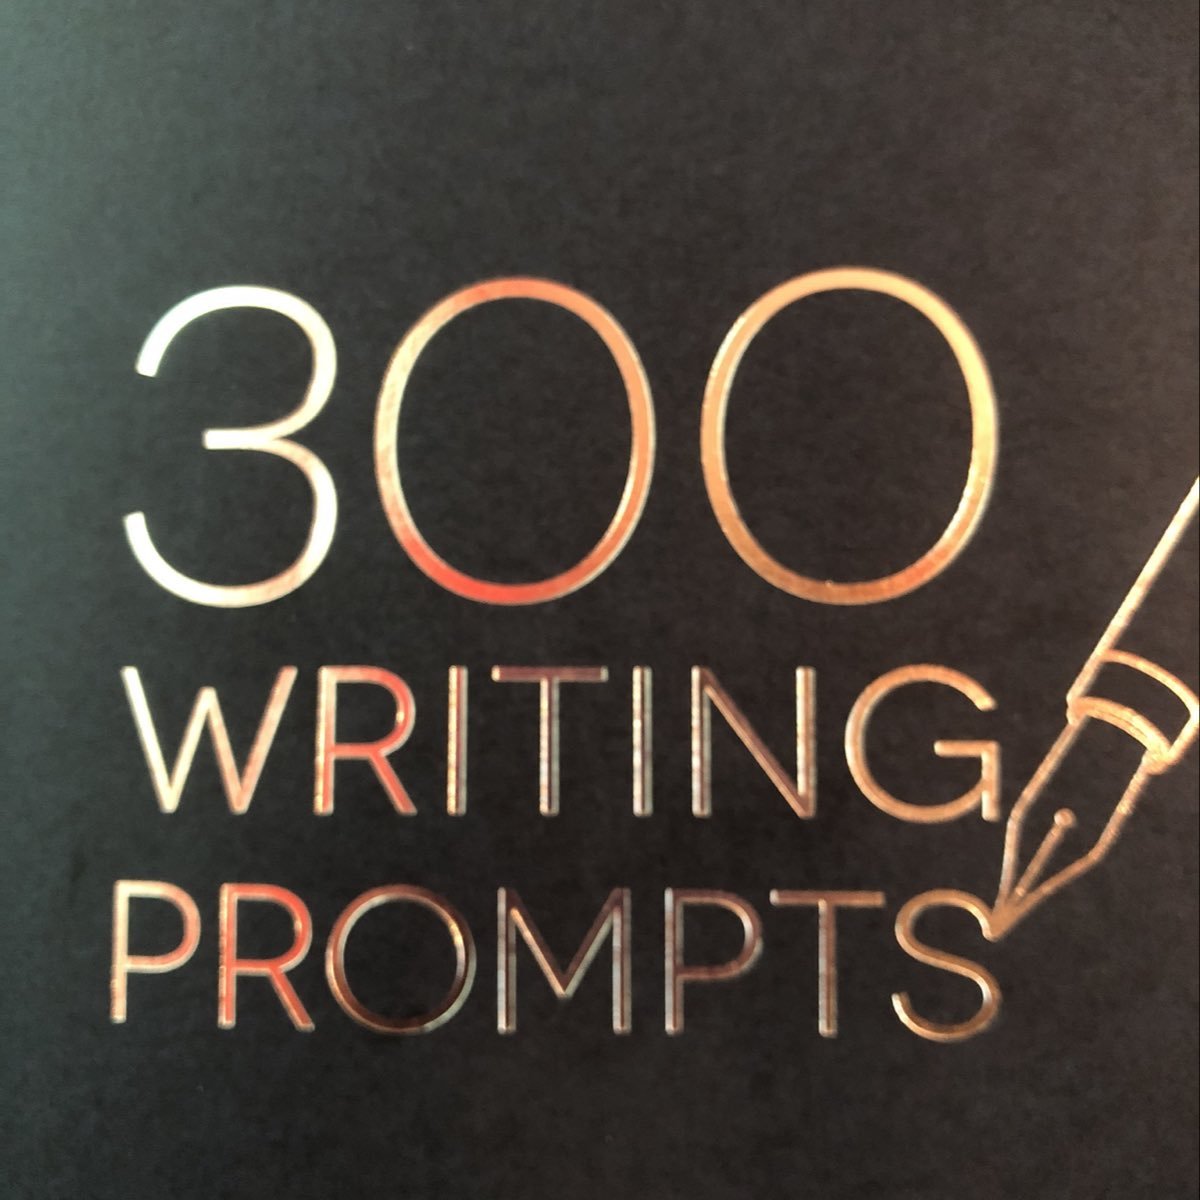 I will upload 300 writing prompts that I have answered and will continue to do it until I hit all 300